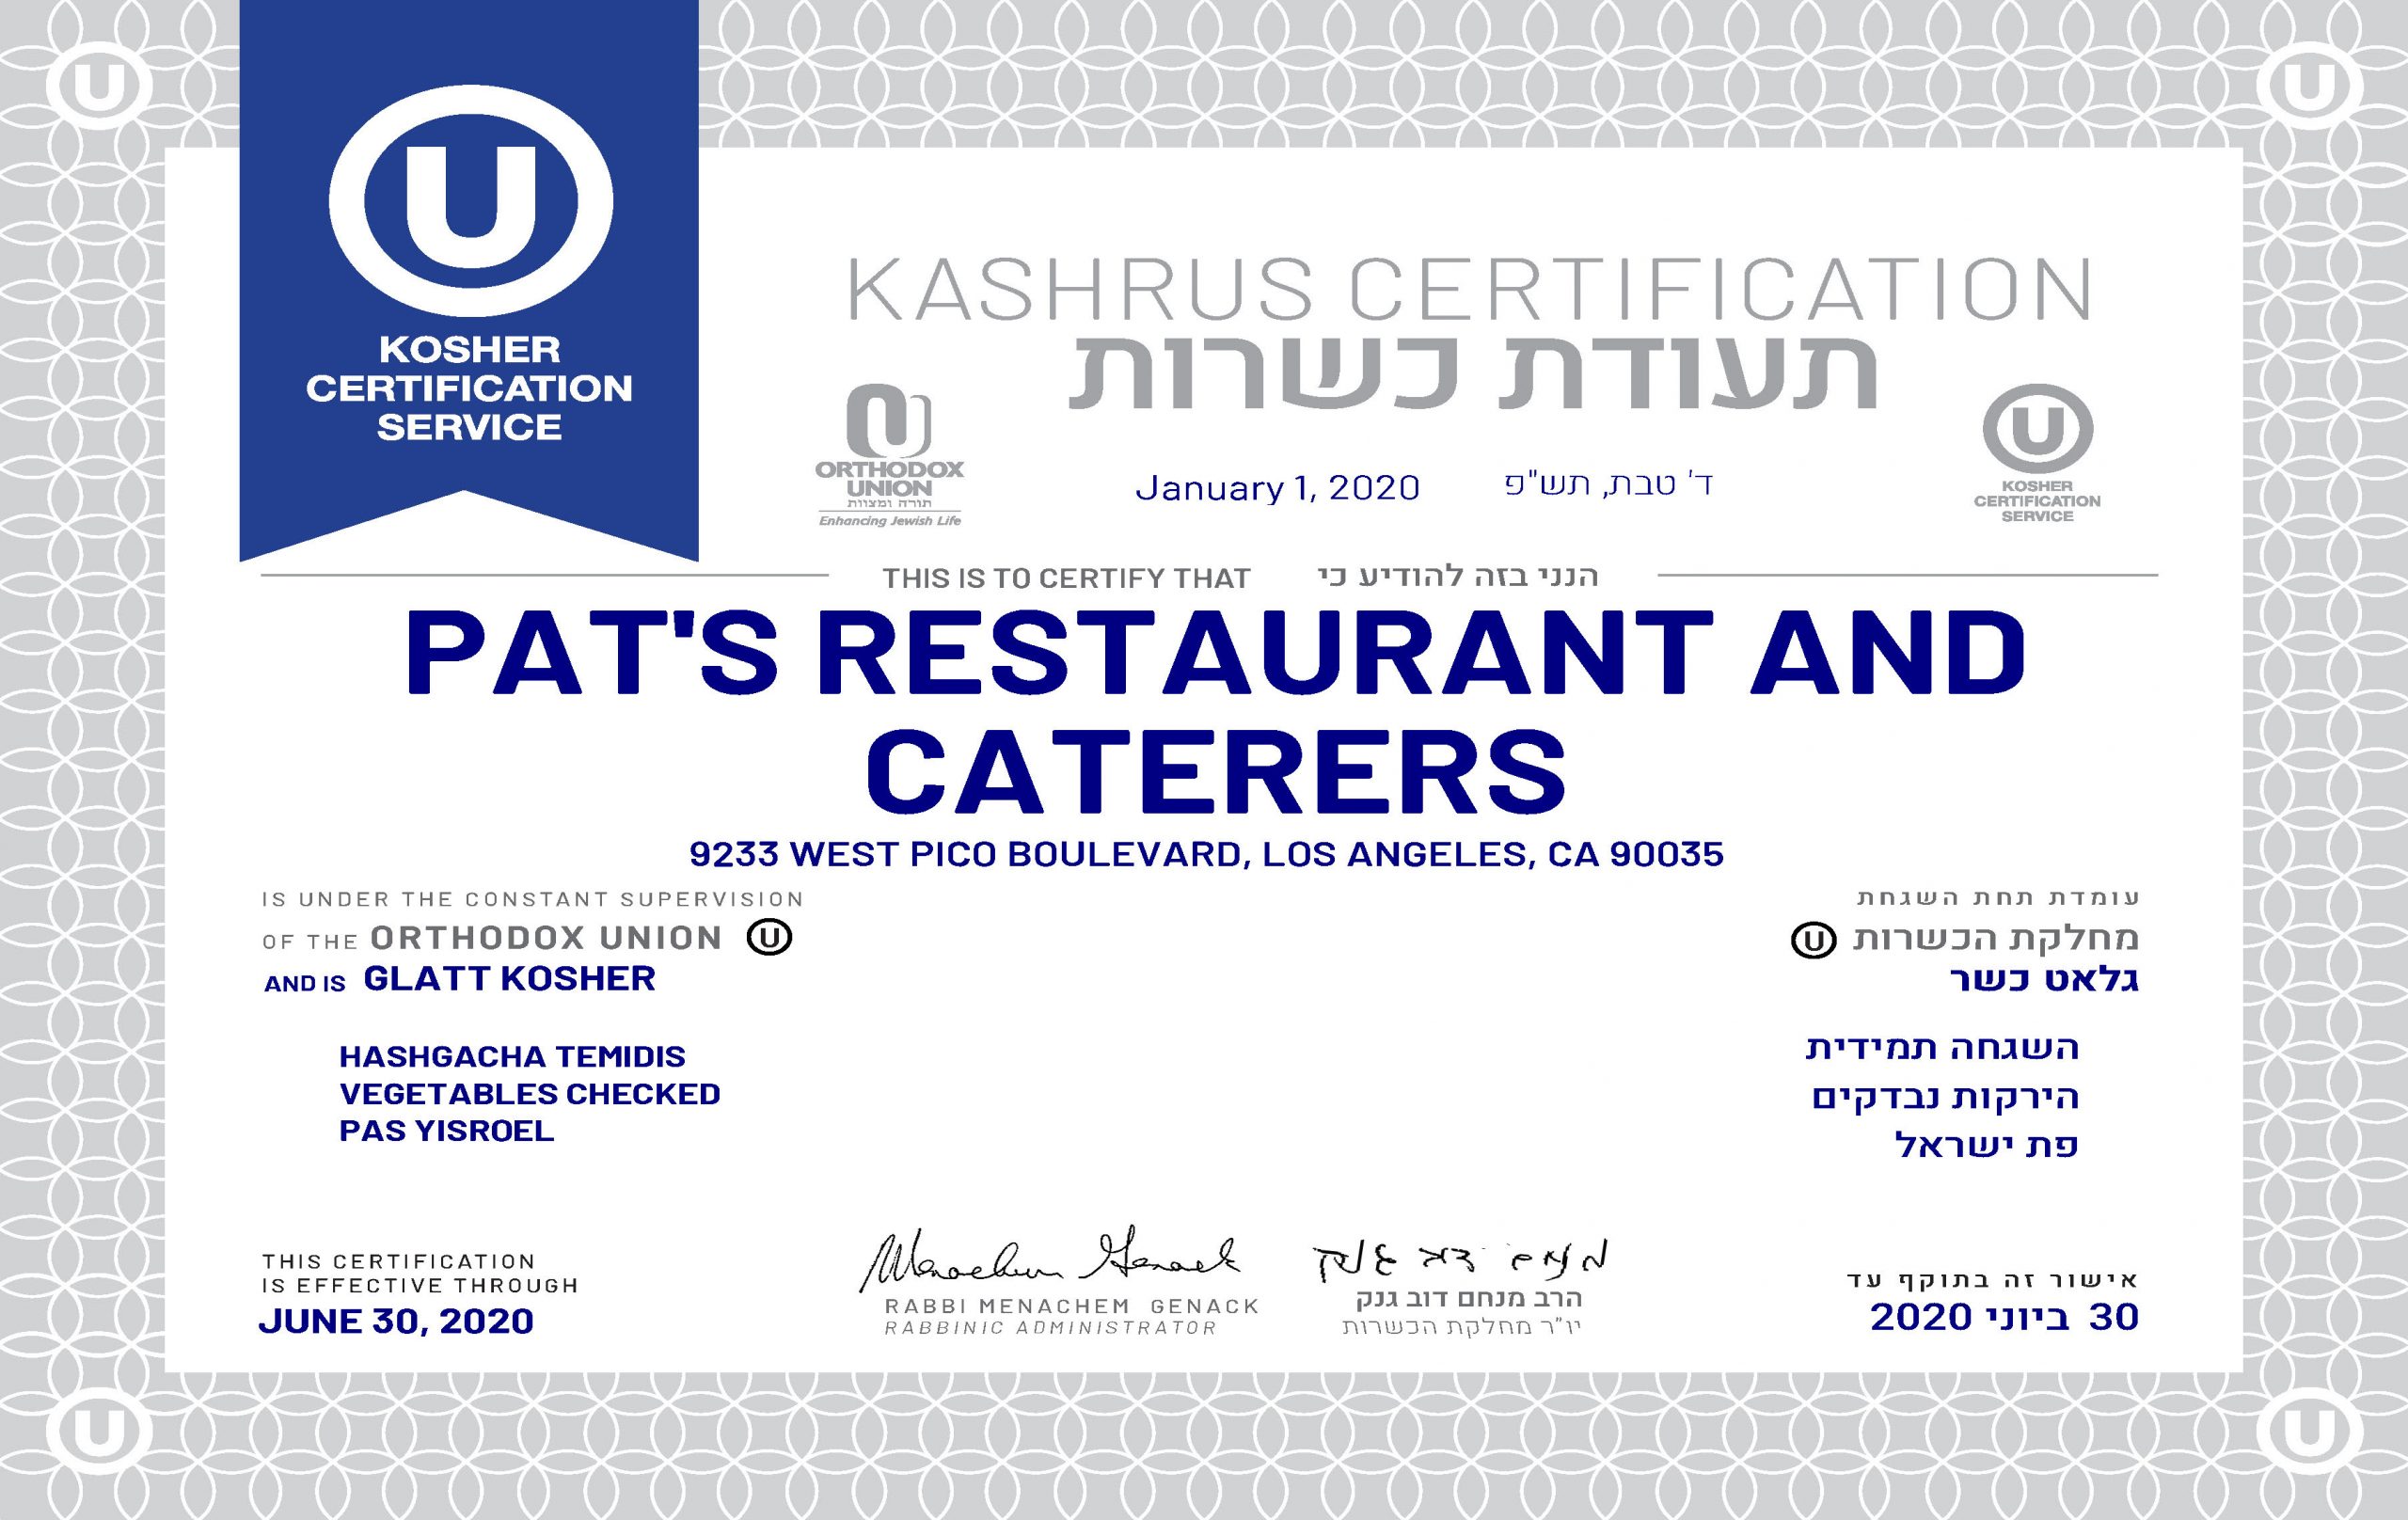 Kosher Certificate PAT #39 S Restaurant and Catering